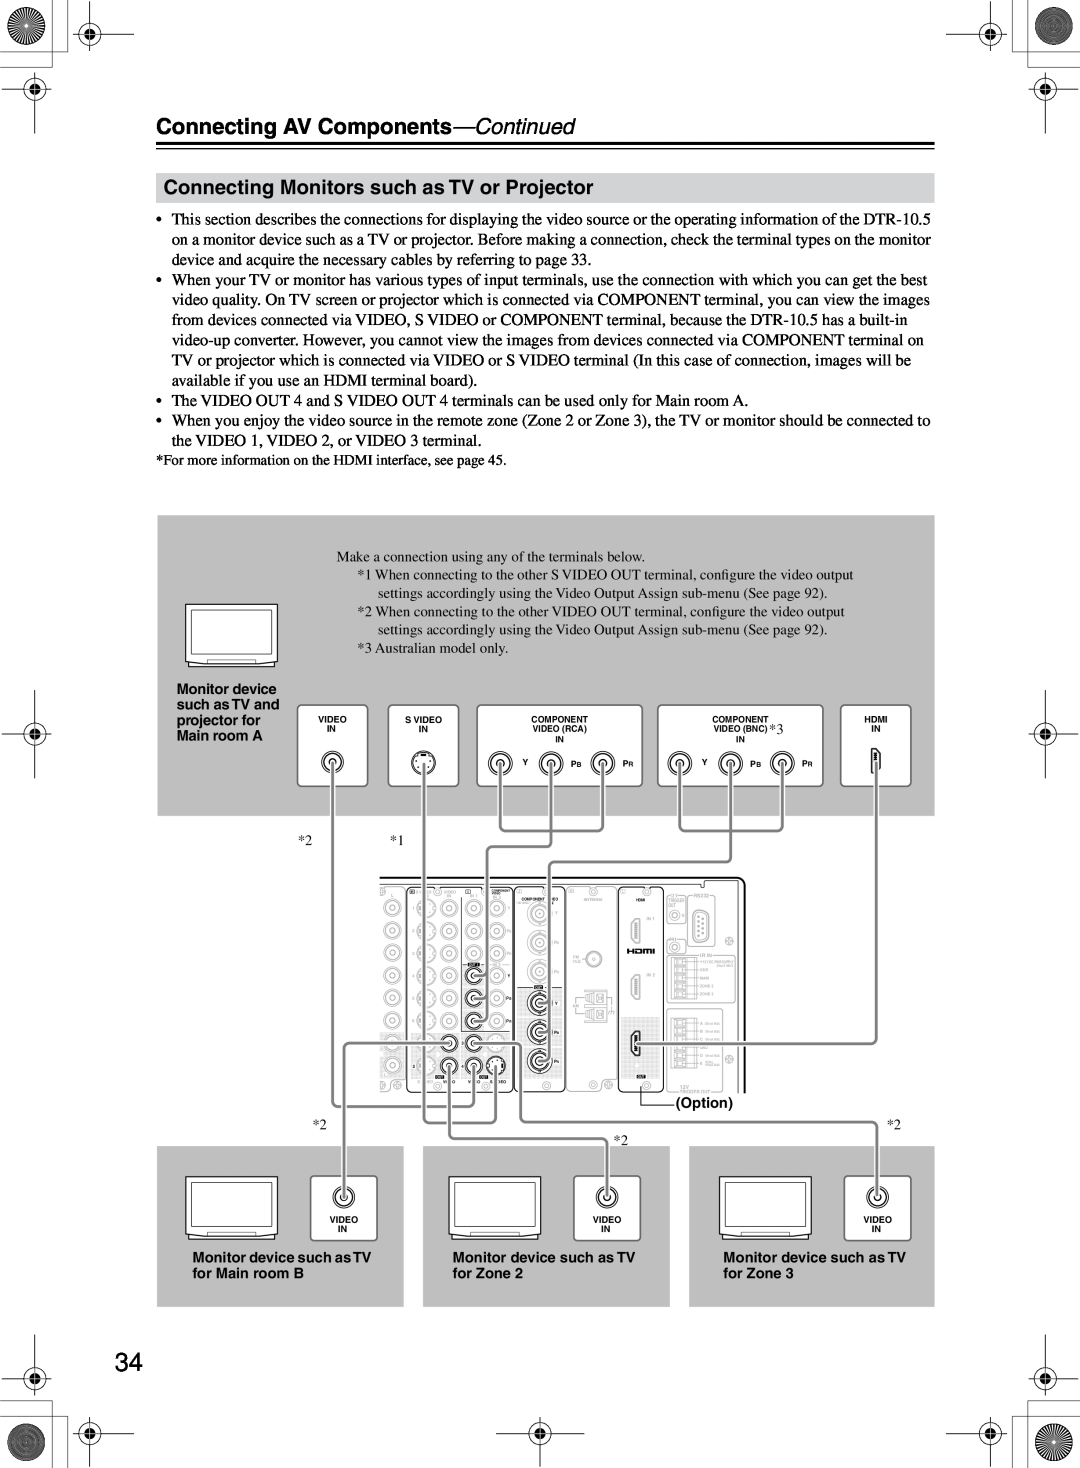 Integra DTR-10.5 instruction manual Connecting Monitors such as TV or Projector, Connecting AV Components—Continued 